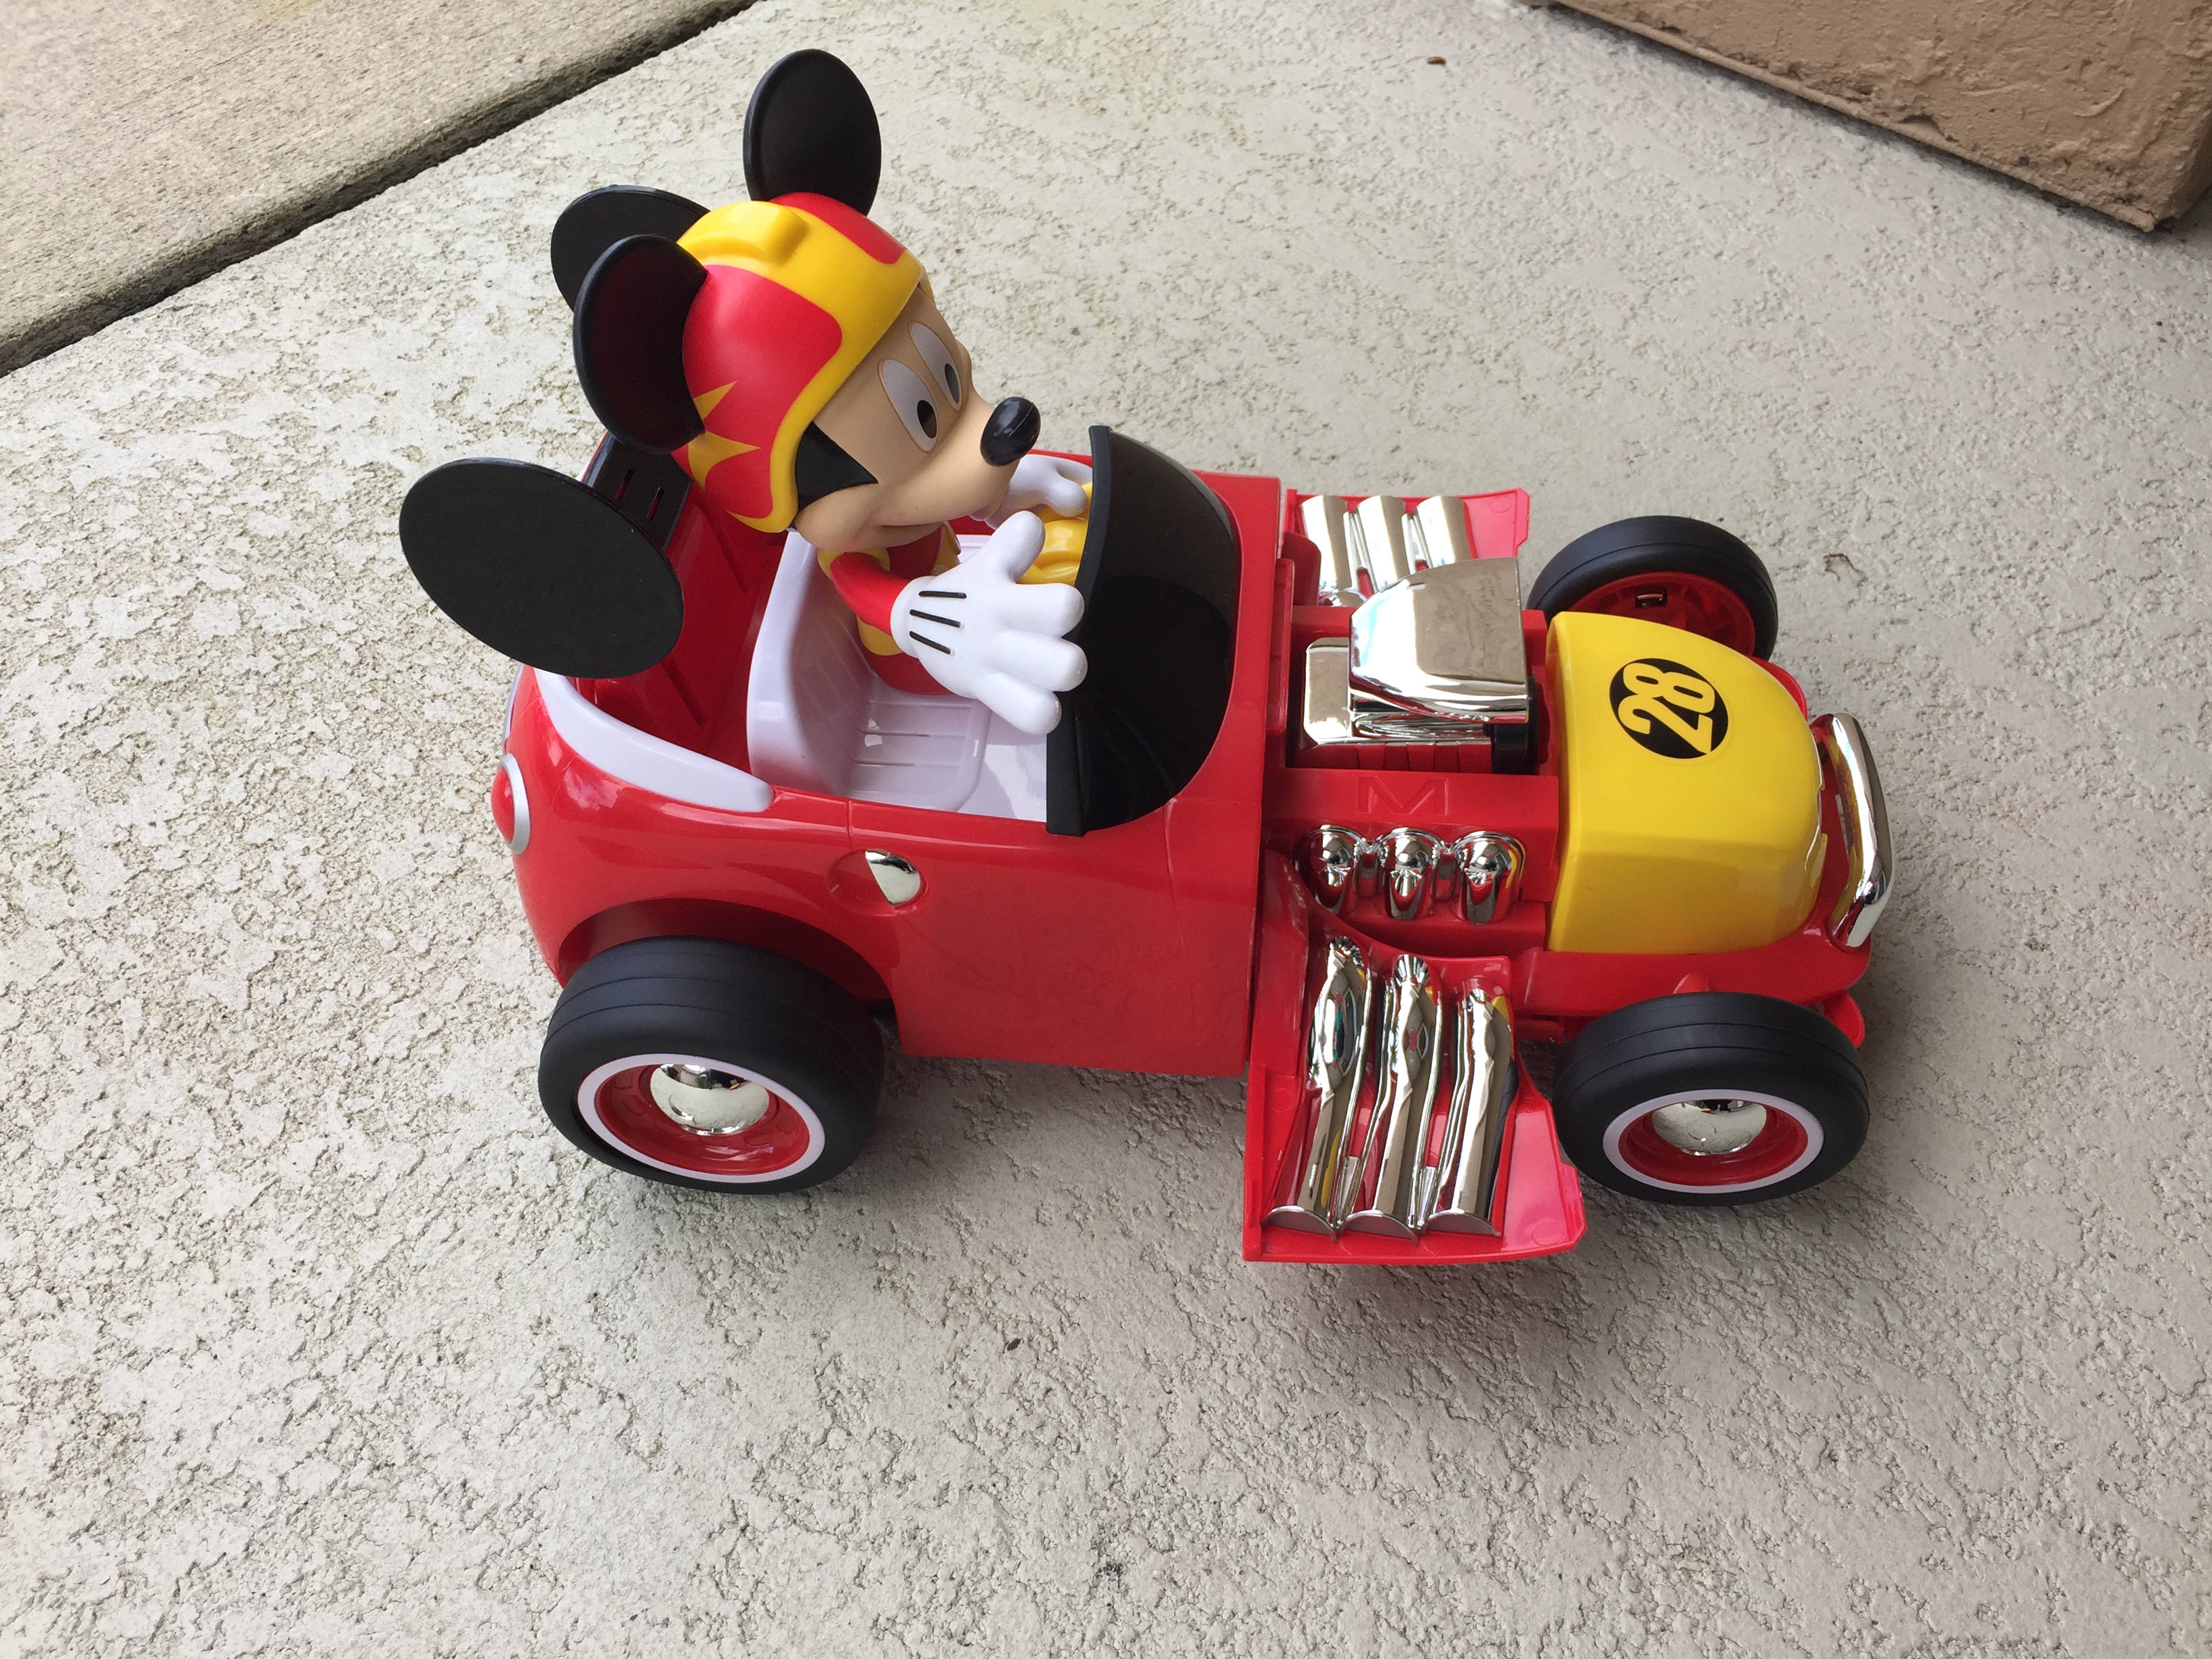 mickey transforming roadster rc